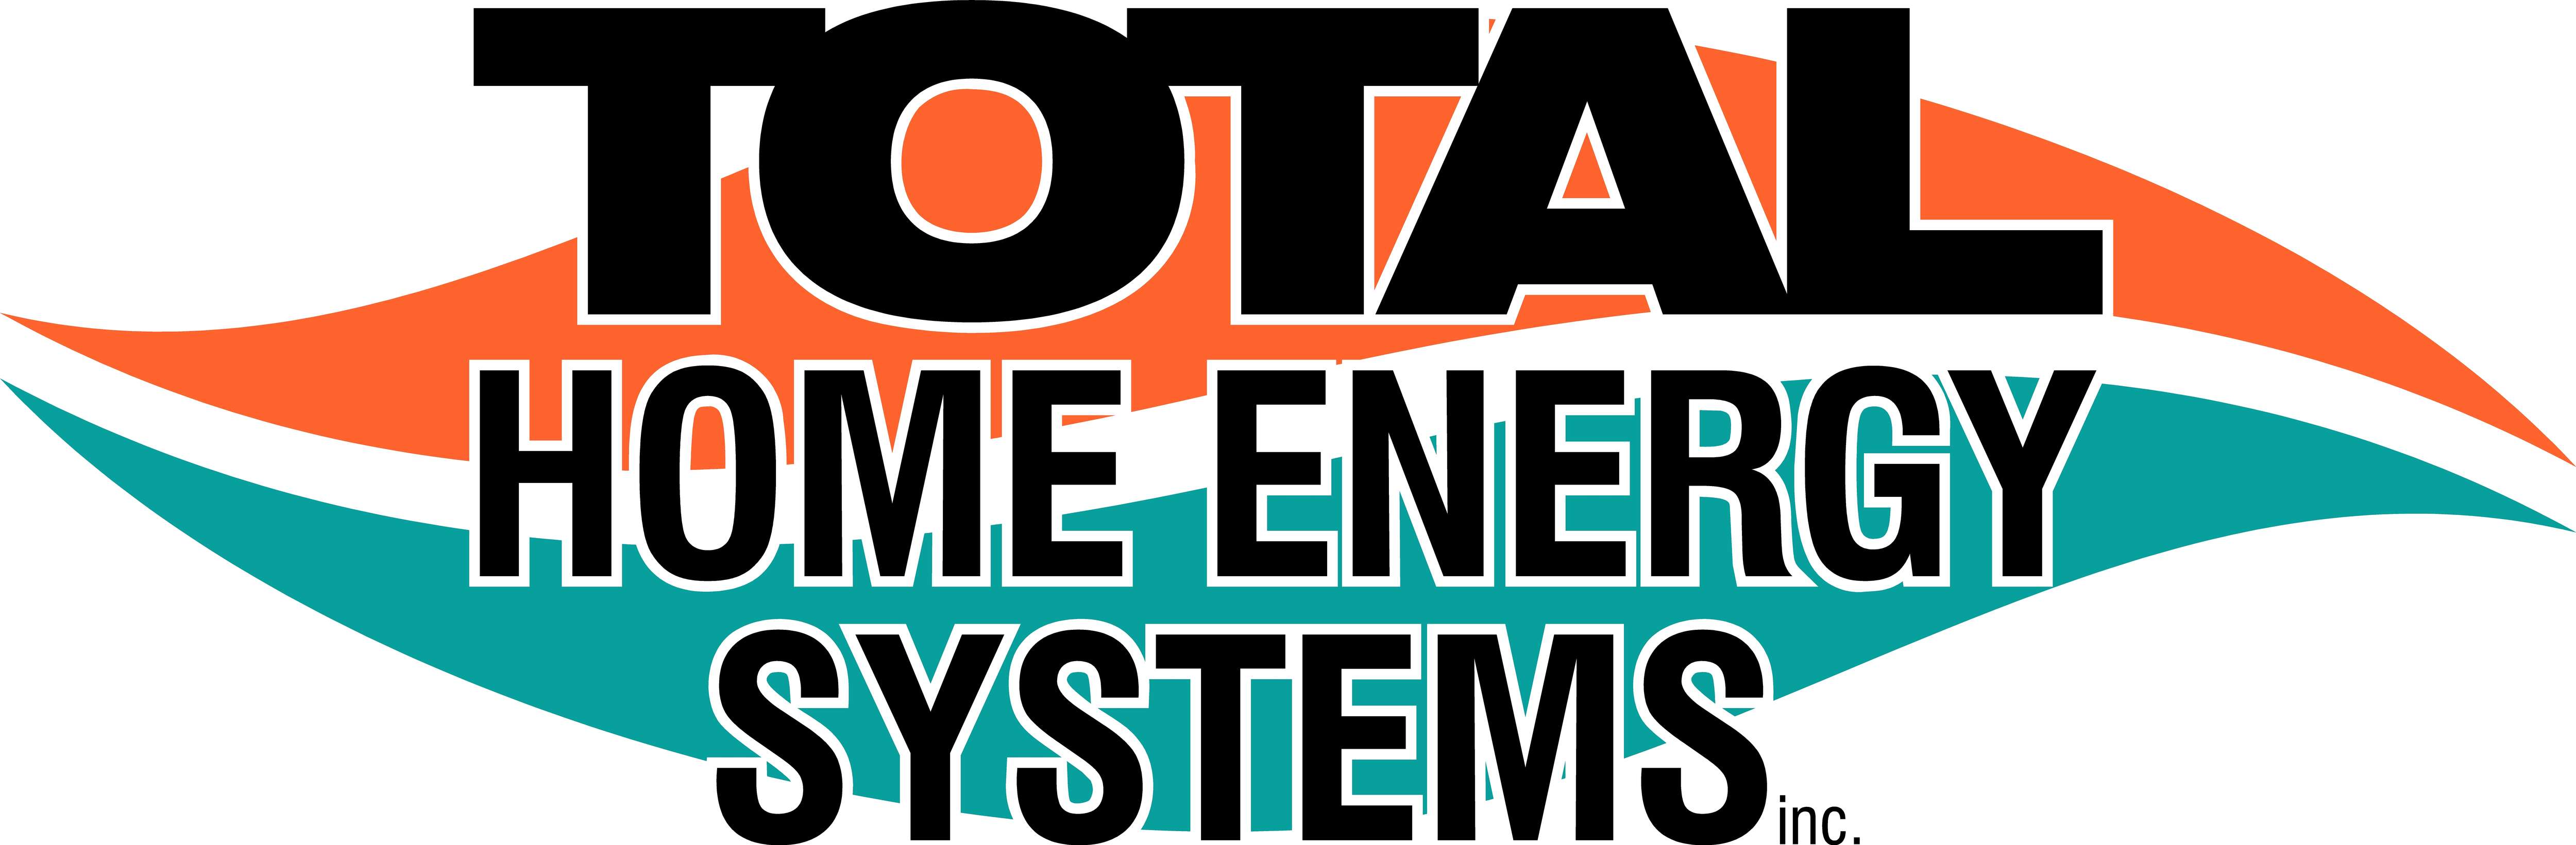 Total Home Energy Solutions